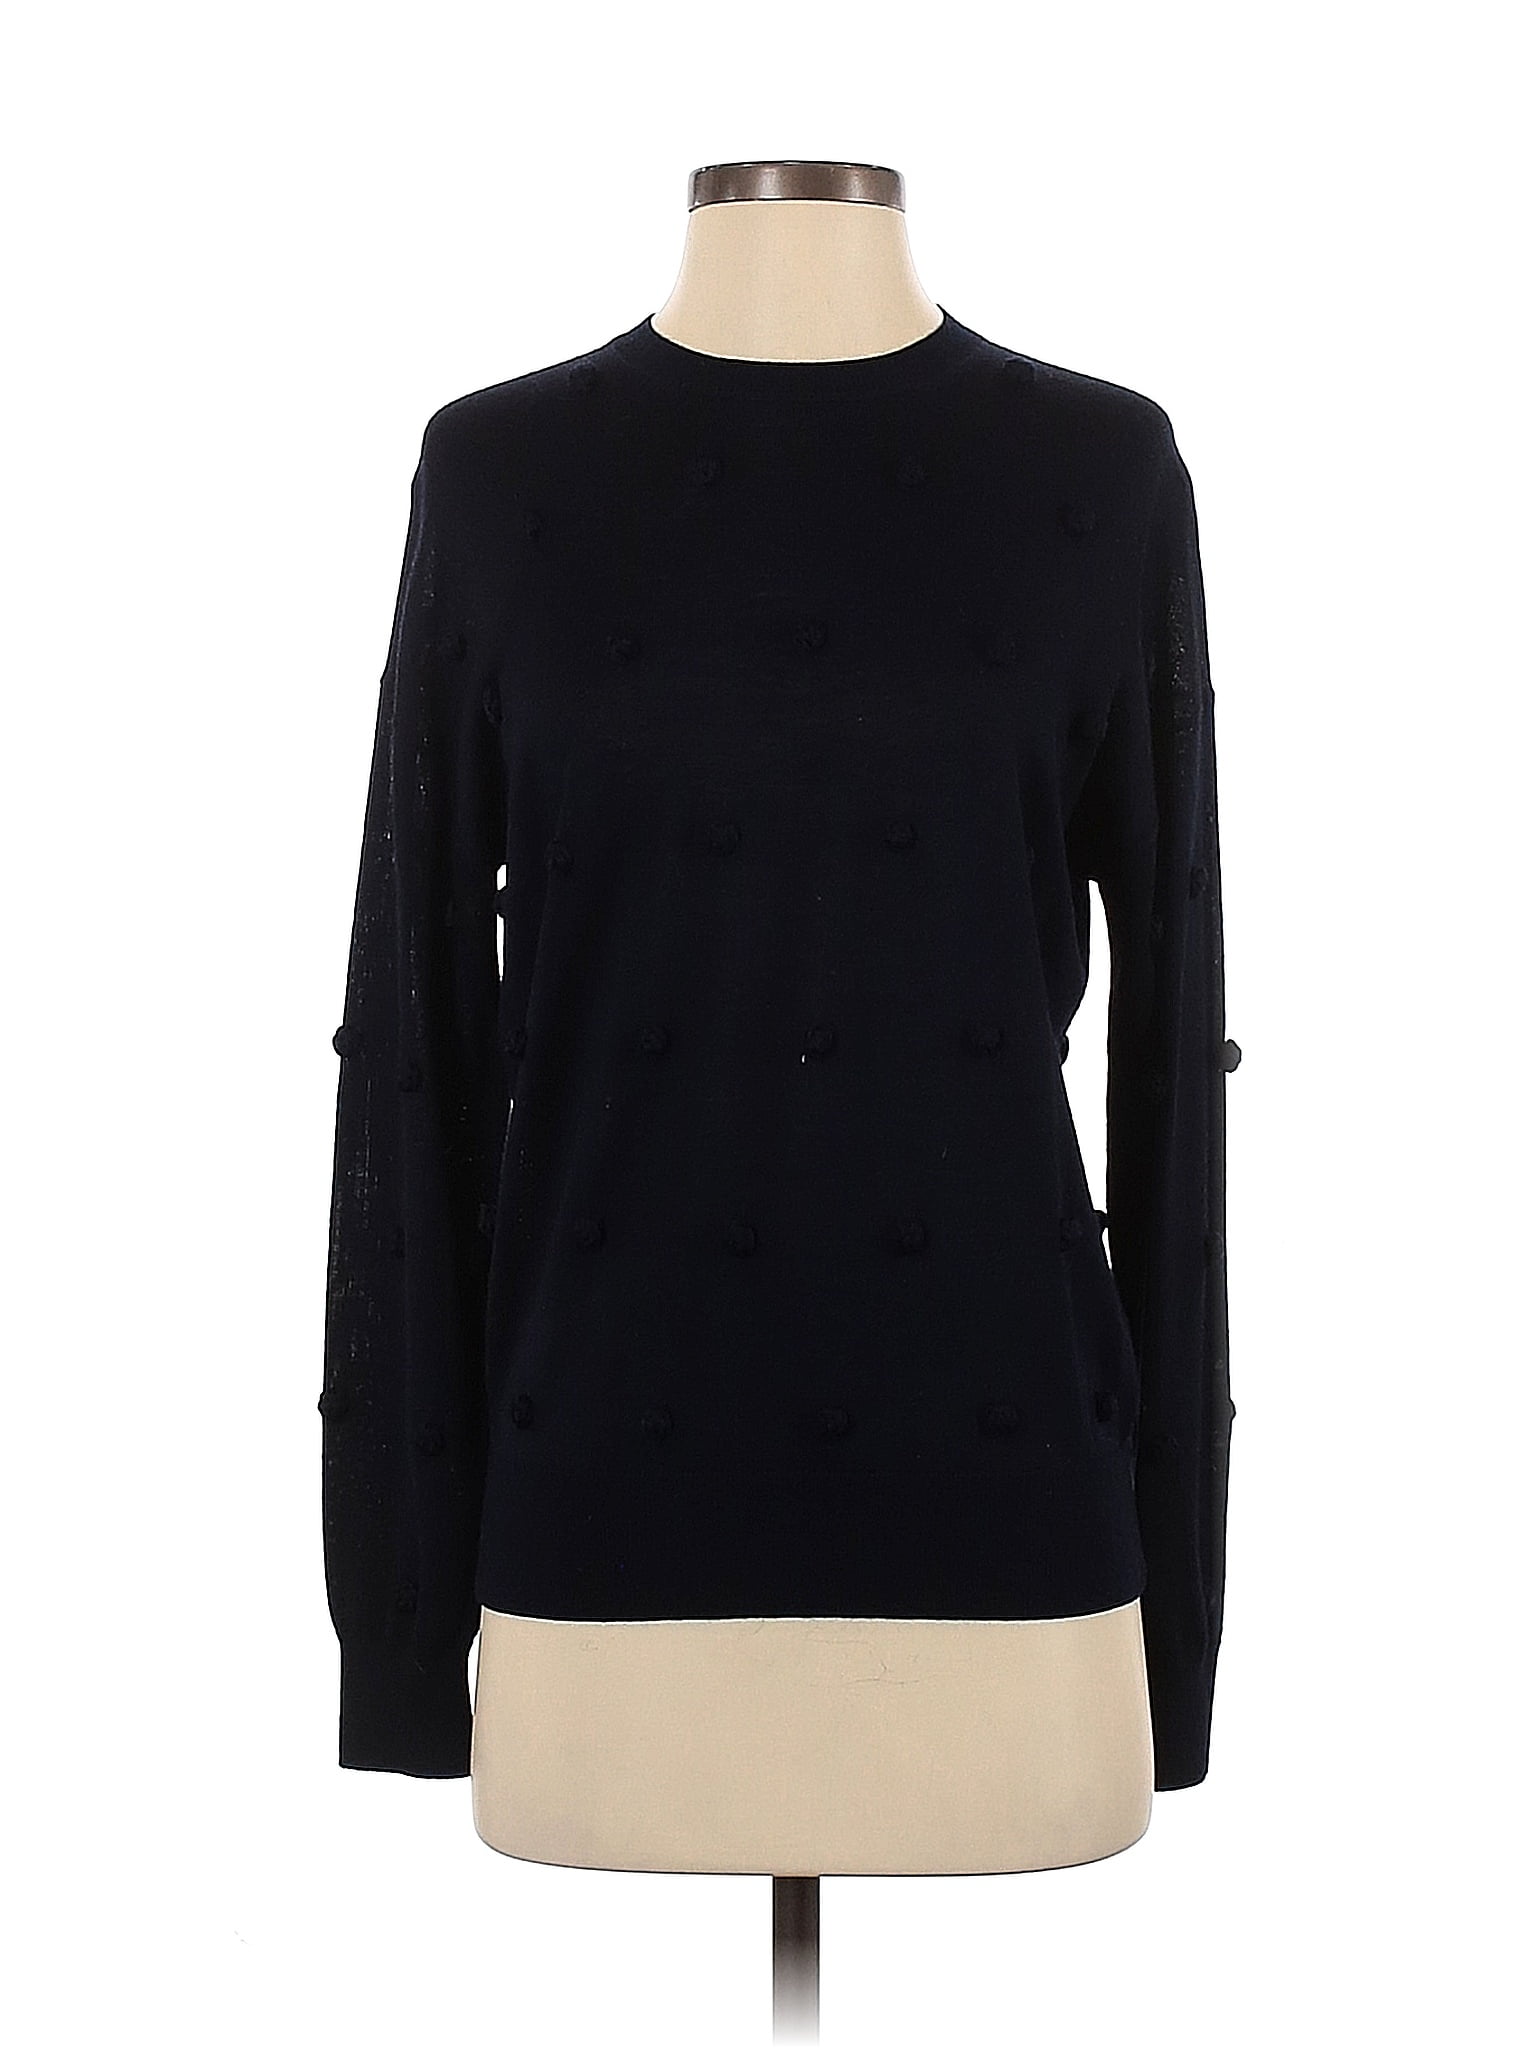 Theory Black Pullover Sweater Size S - 82% off | thredUP